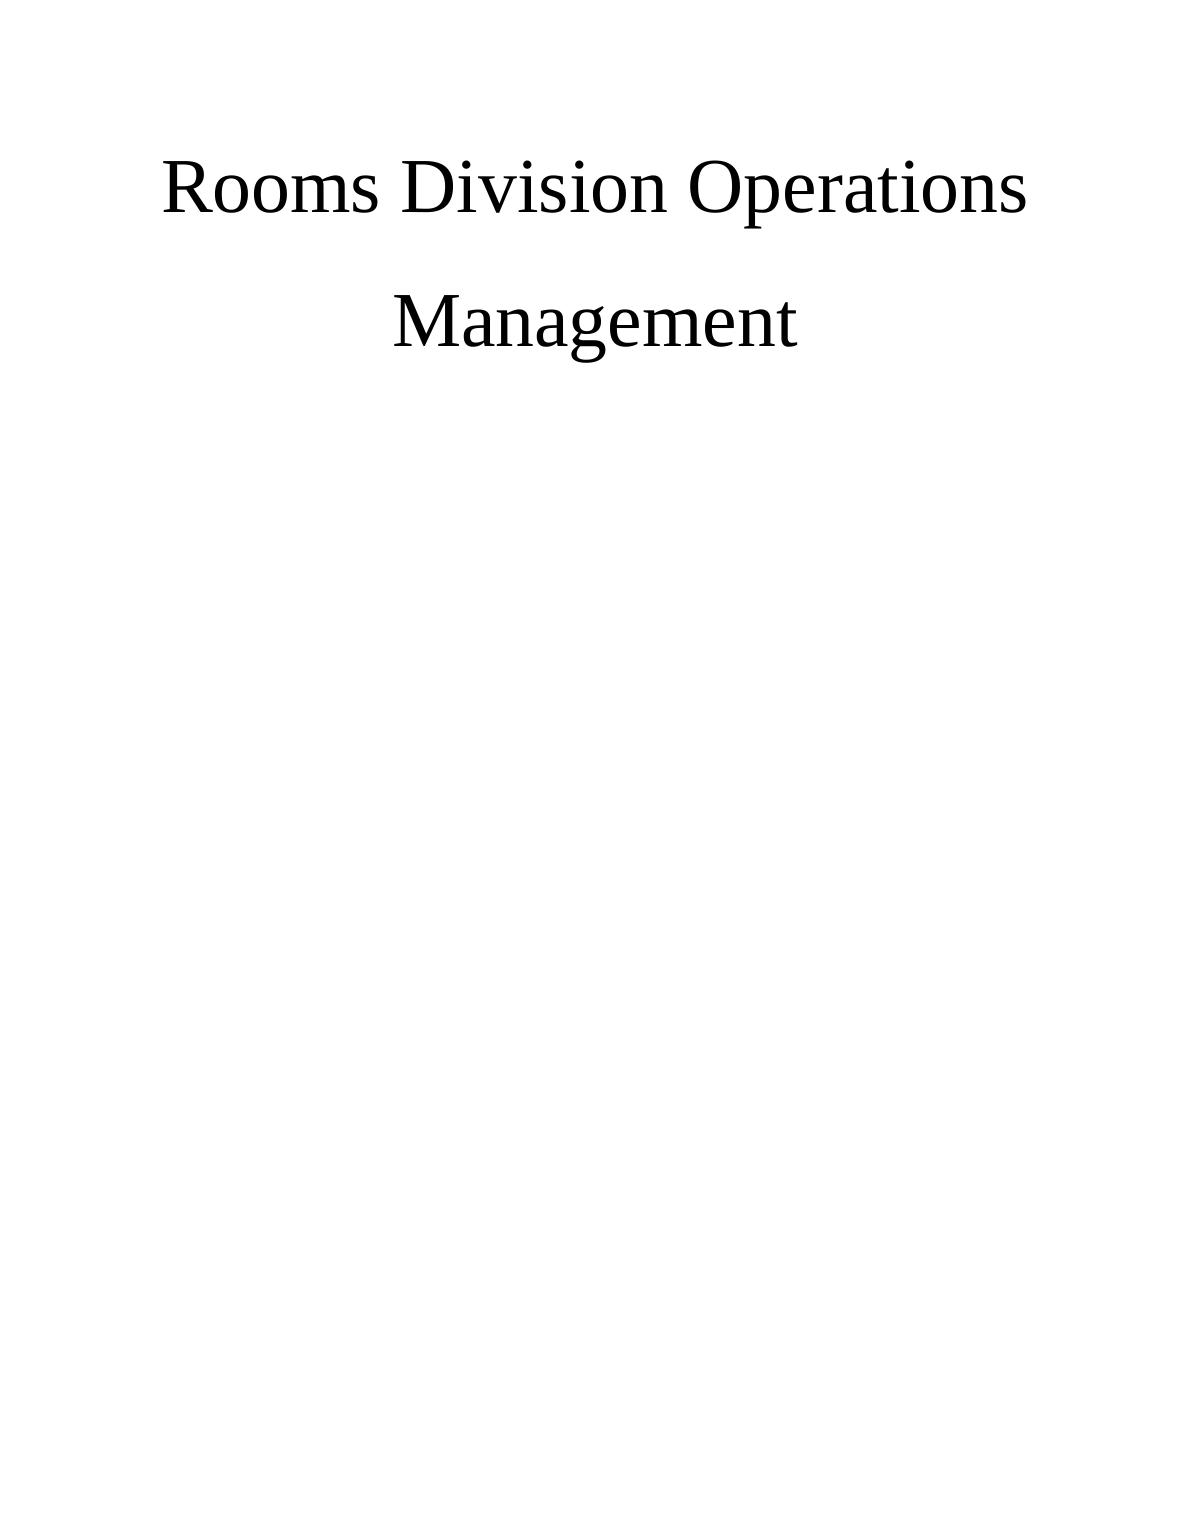 Rooms Division Operations Management TASK 11_1